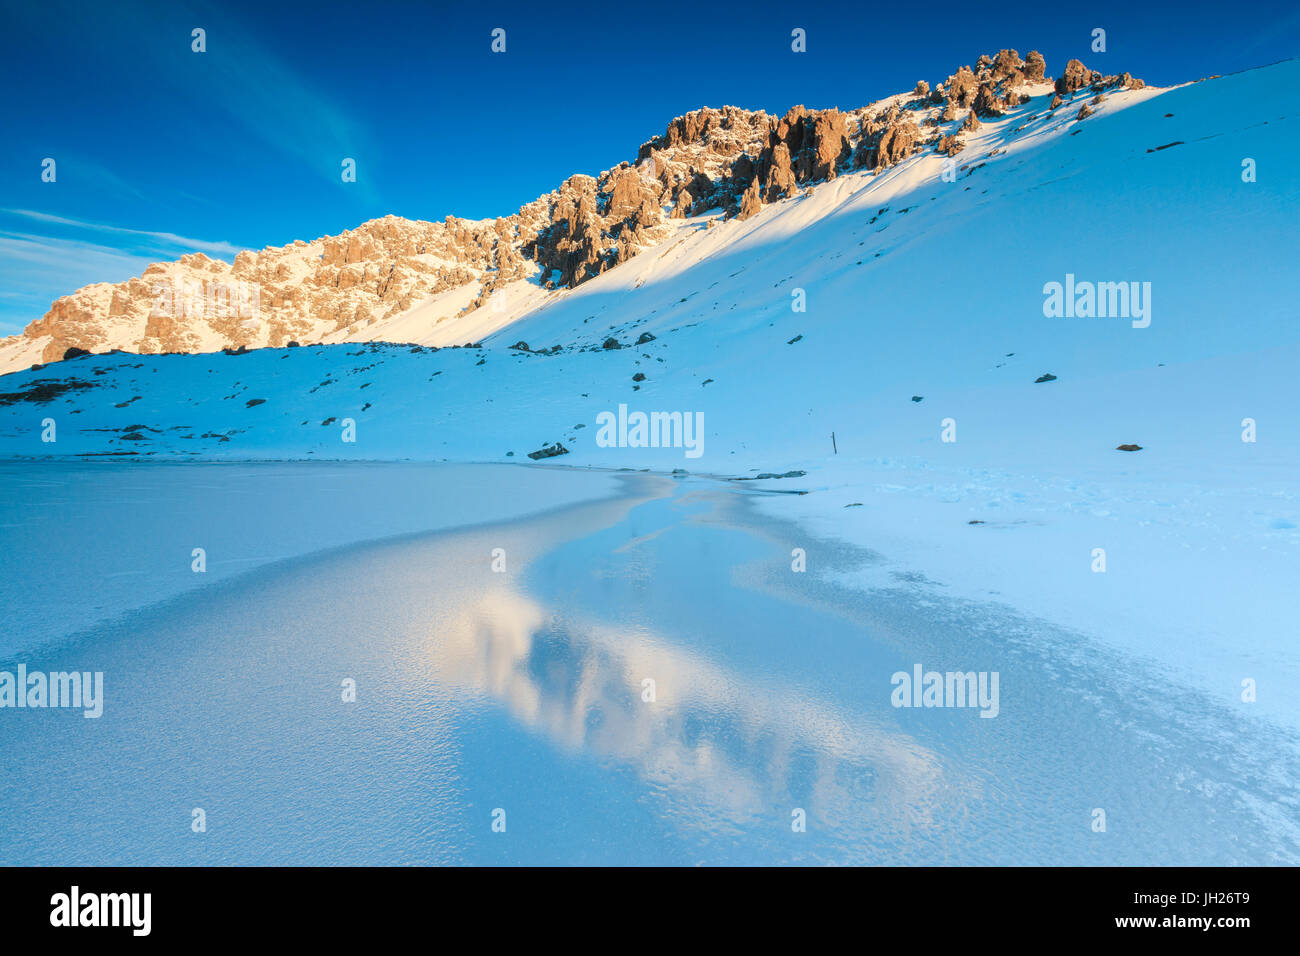 Snowy peaks reflected in the icy Lake, Piz Umbrail at dawn, Braulio Valley, Valtellina, Lombardy, Italy, Europe Stock Photo